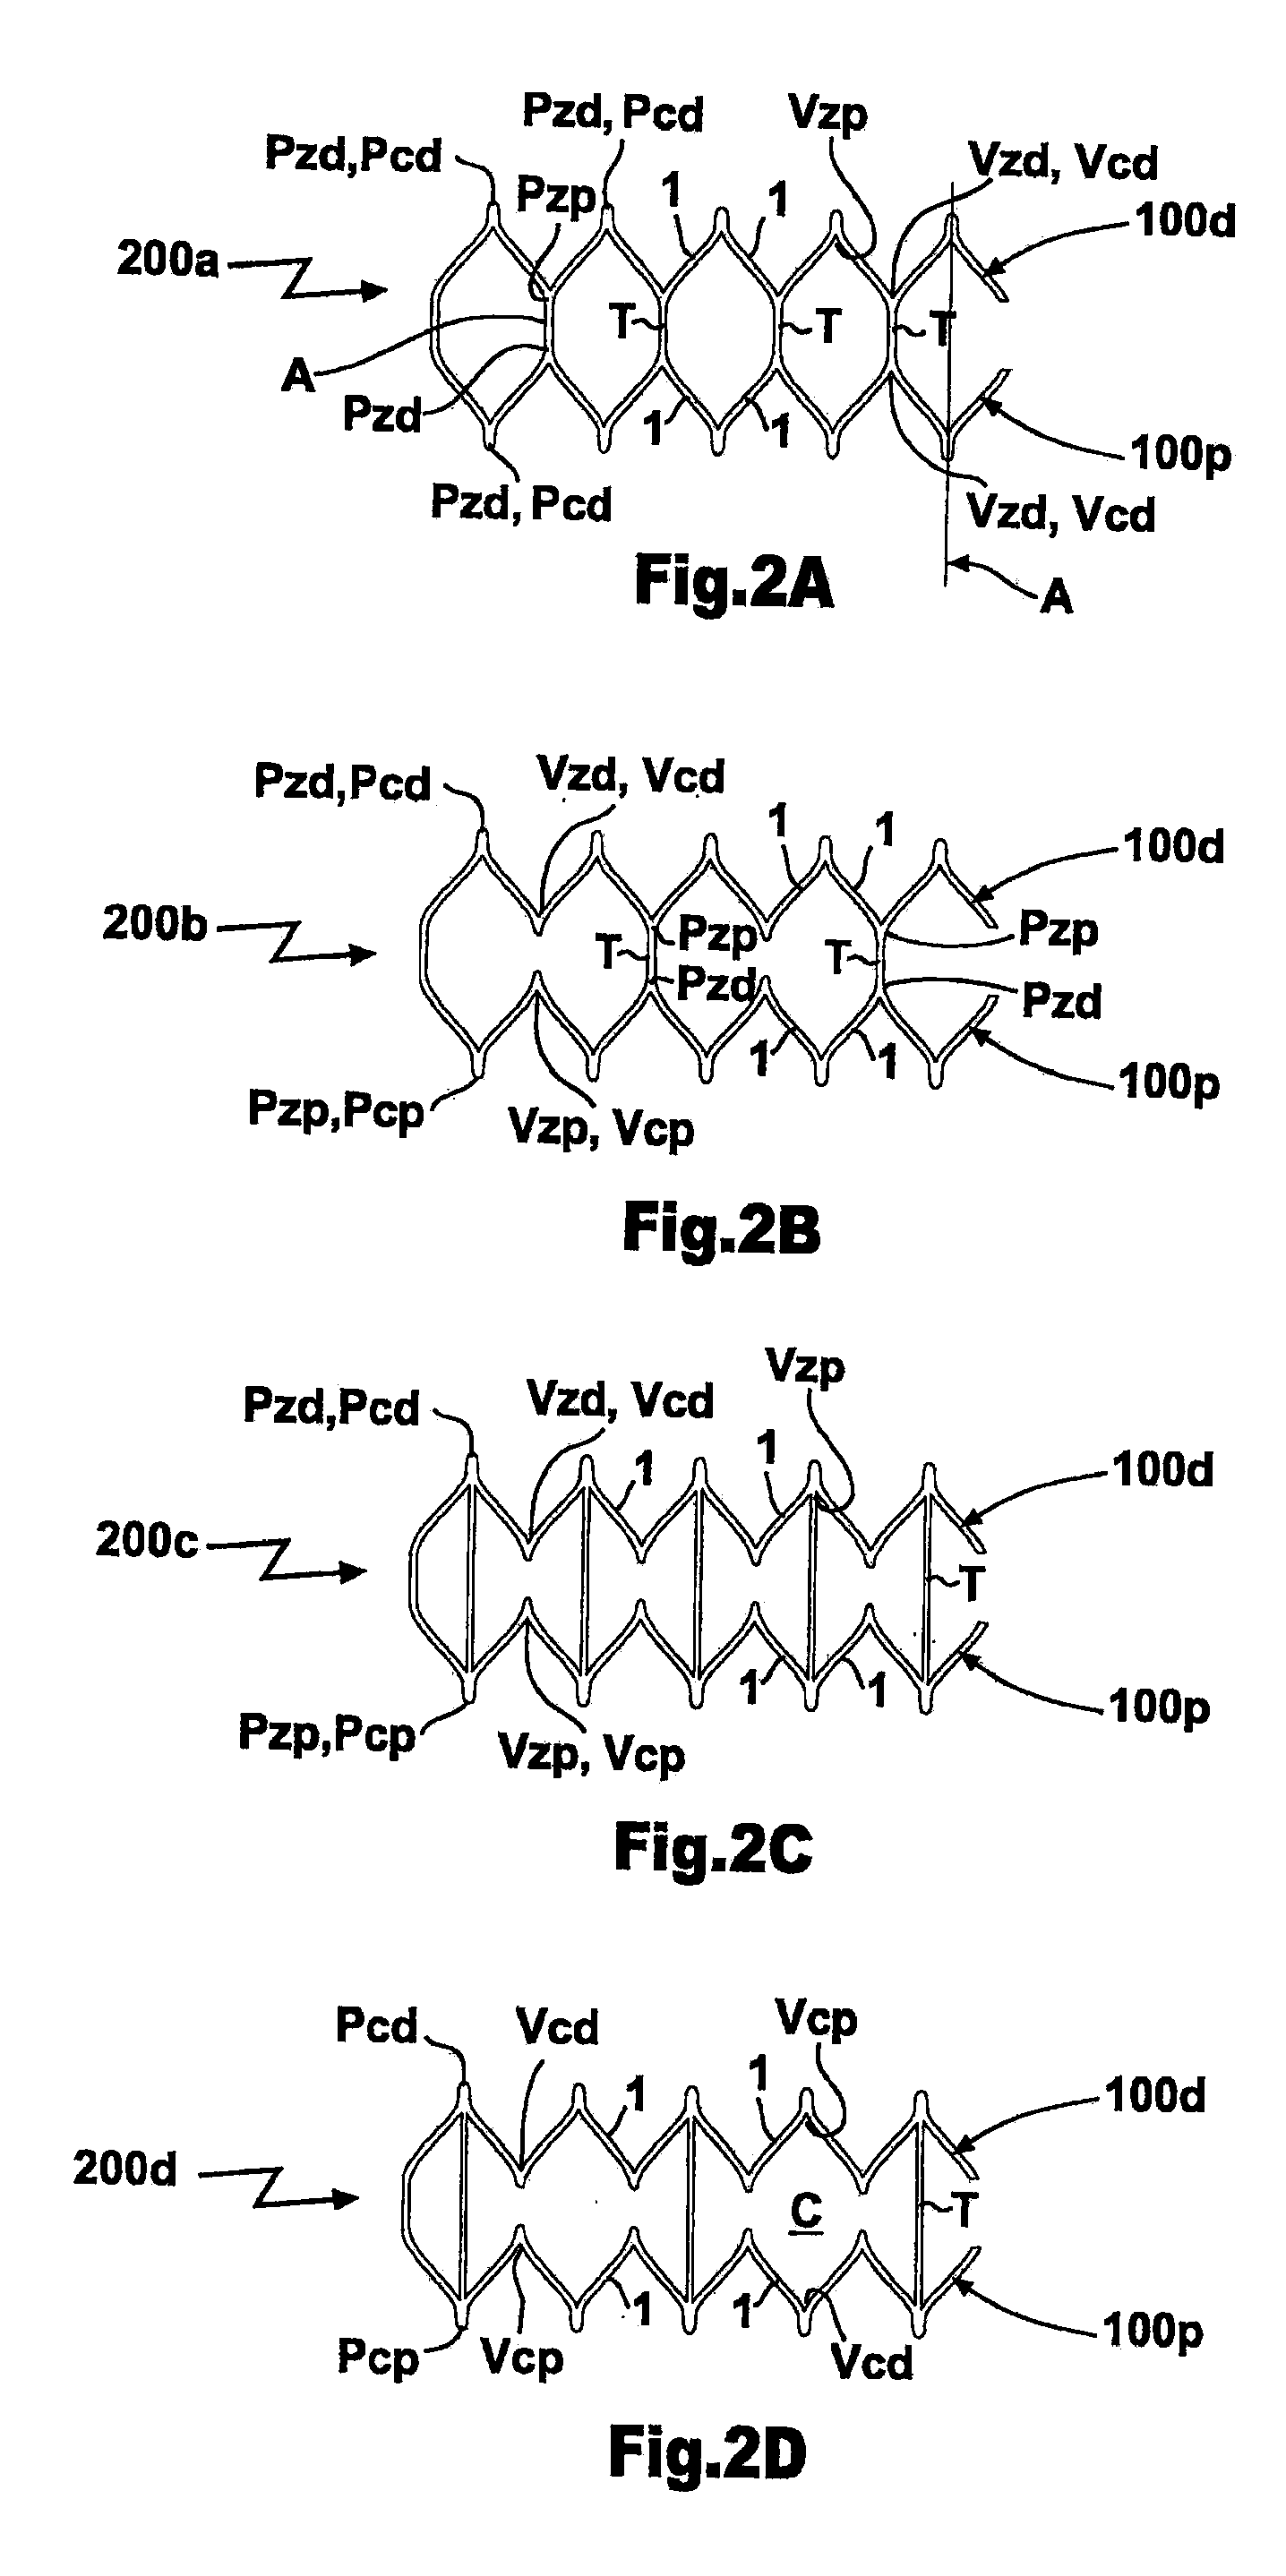 Multi-Segment Modular Stent And Methods For Manufacturing Stents